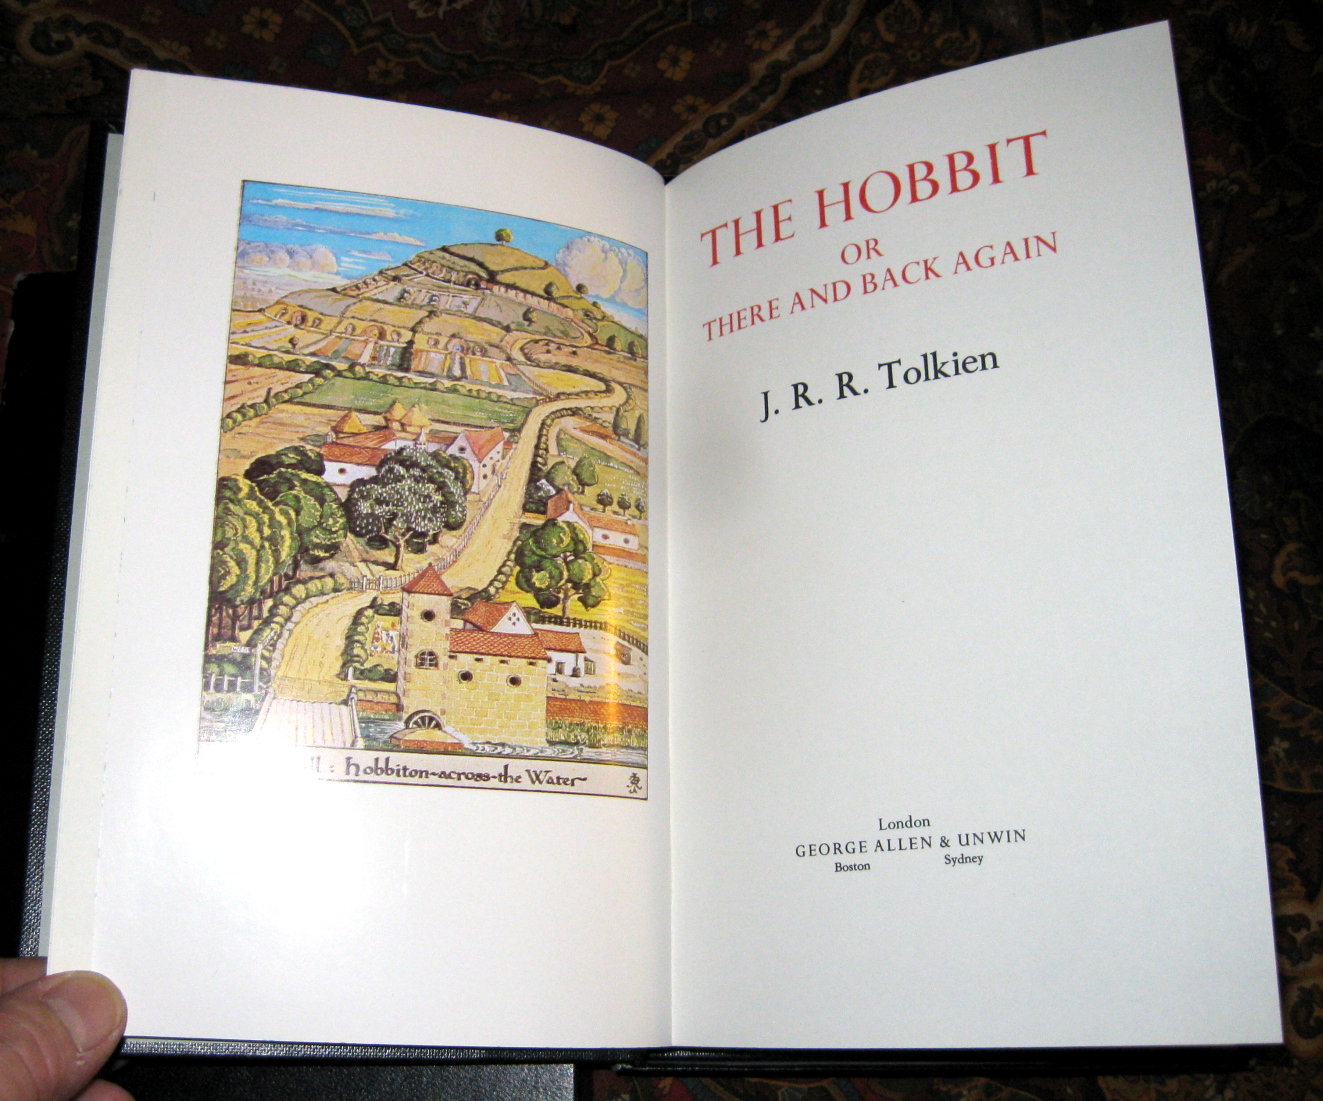 This copy is the 4th impression, published in 1986, of the 1st De Luxe Edition of 1976, with the Tolkien line drawings colorized by H. E. Riddett.